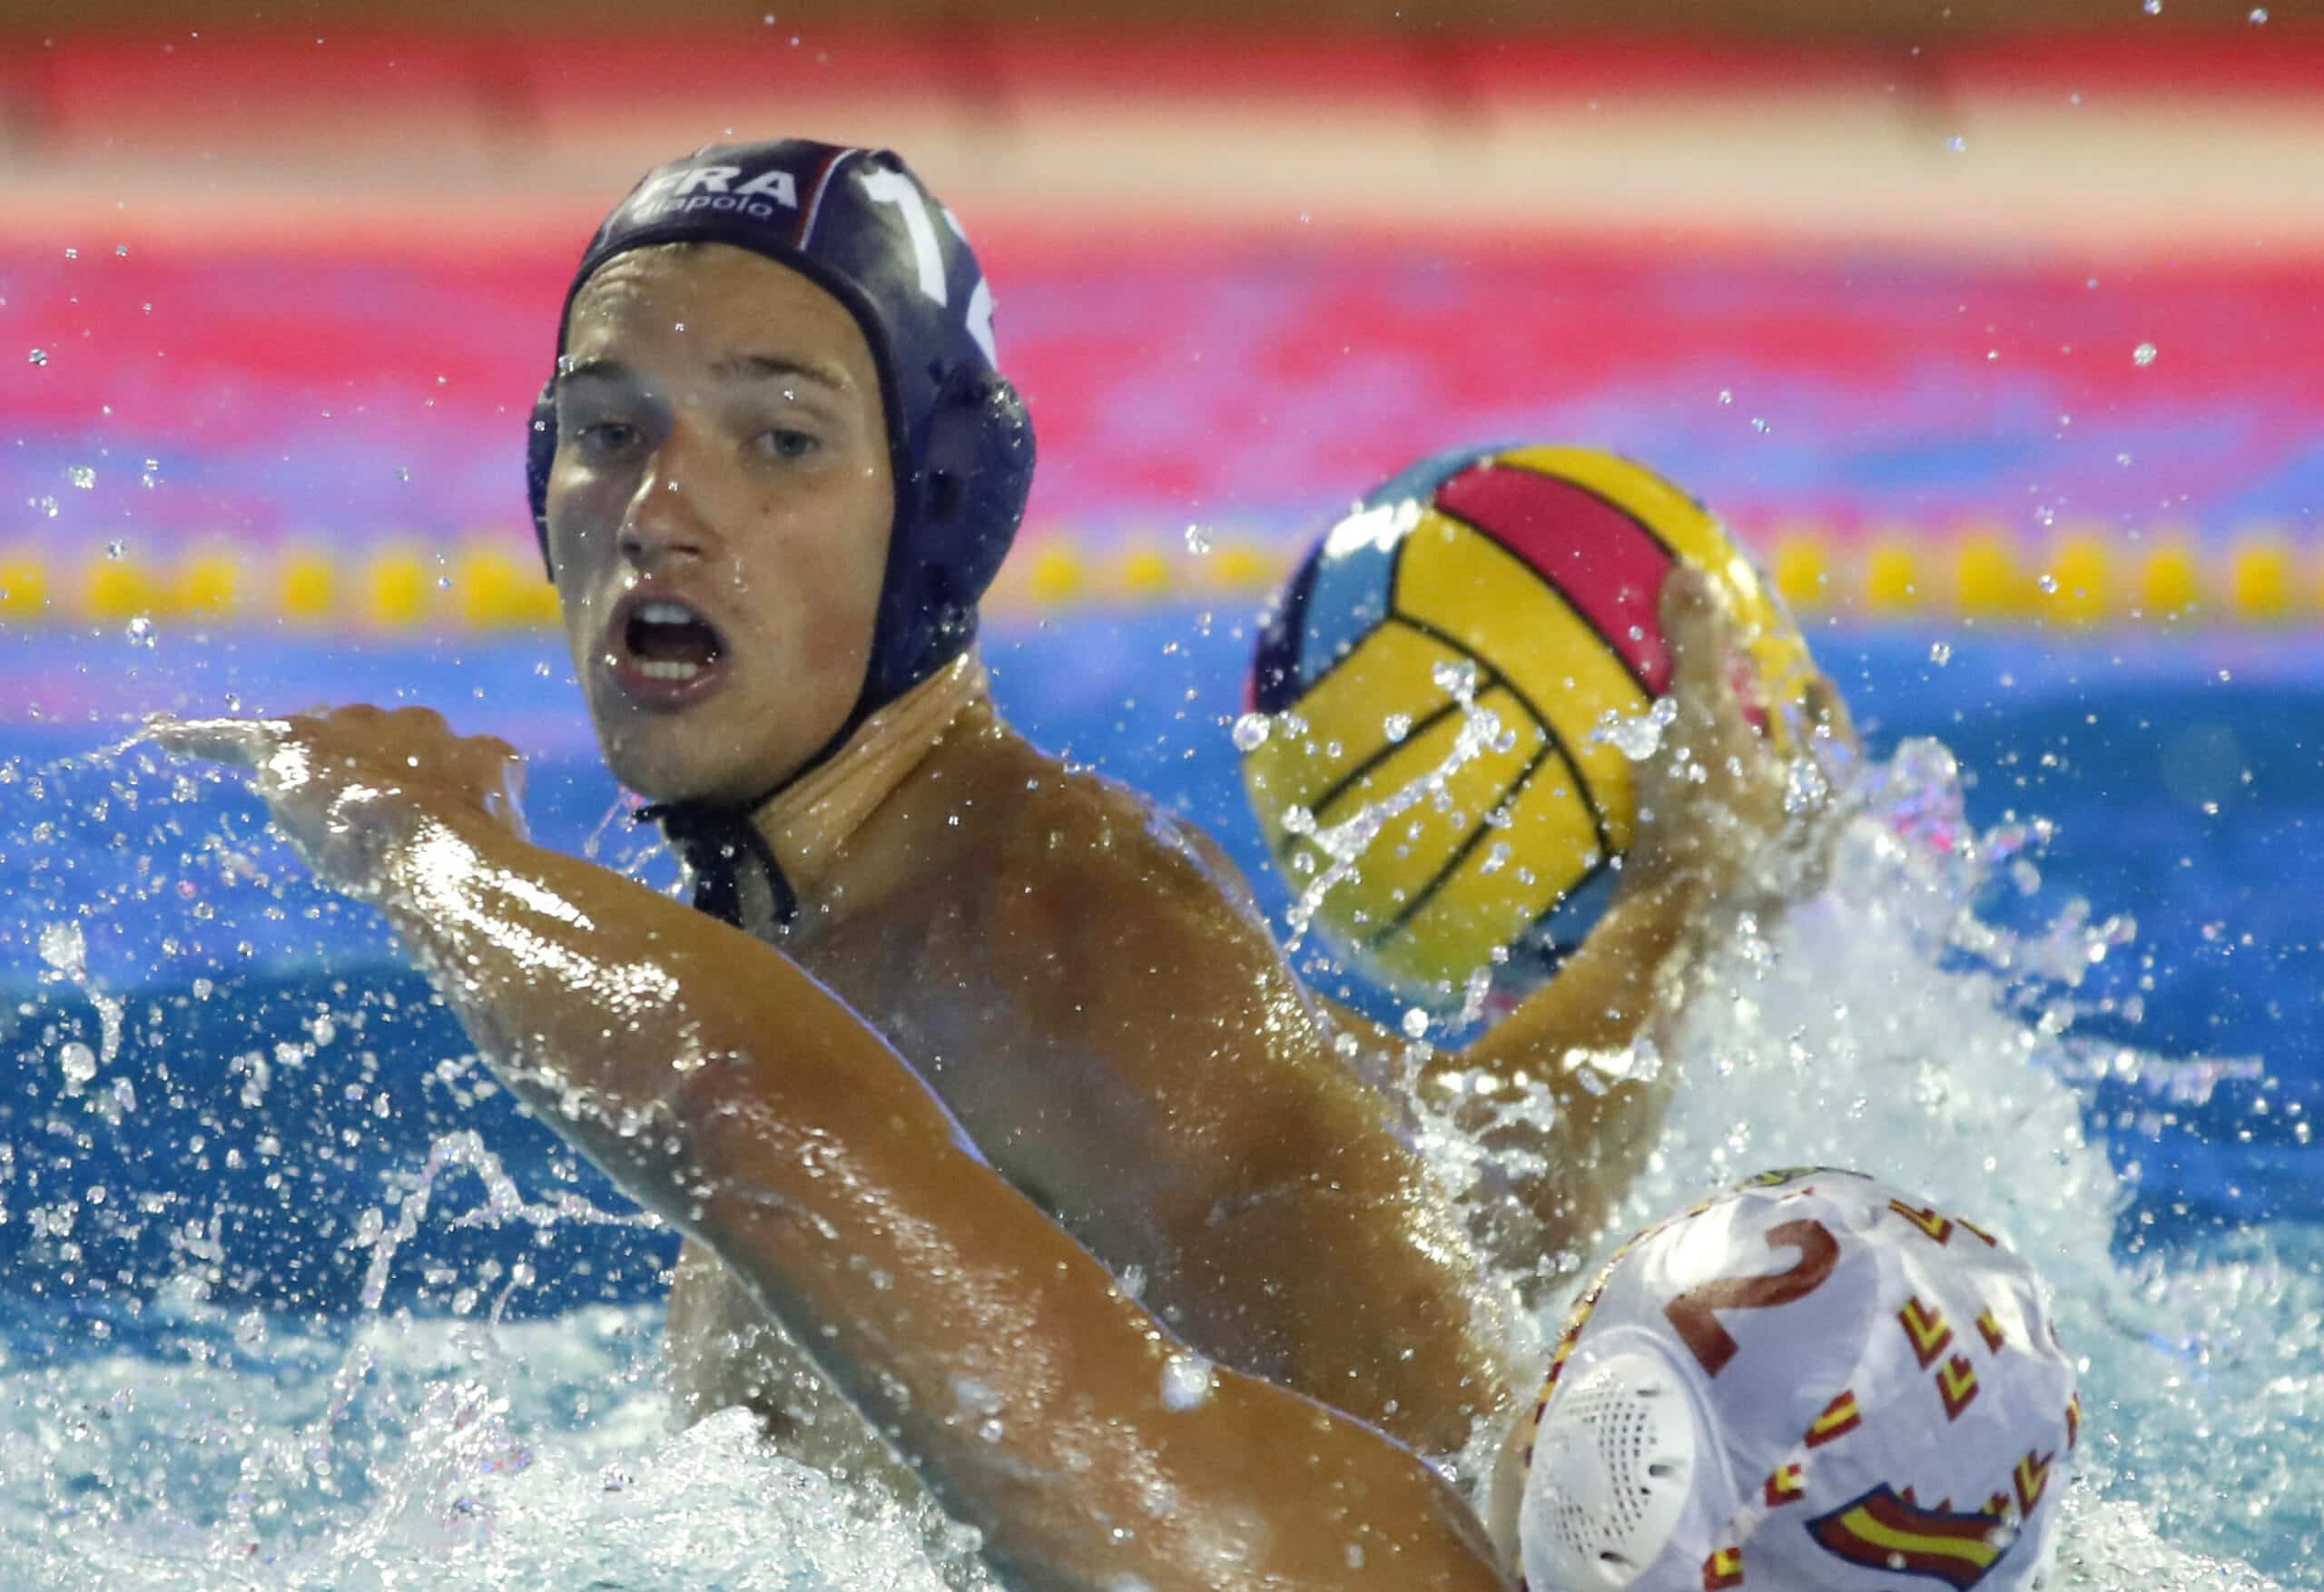 Champions League waterpolo